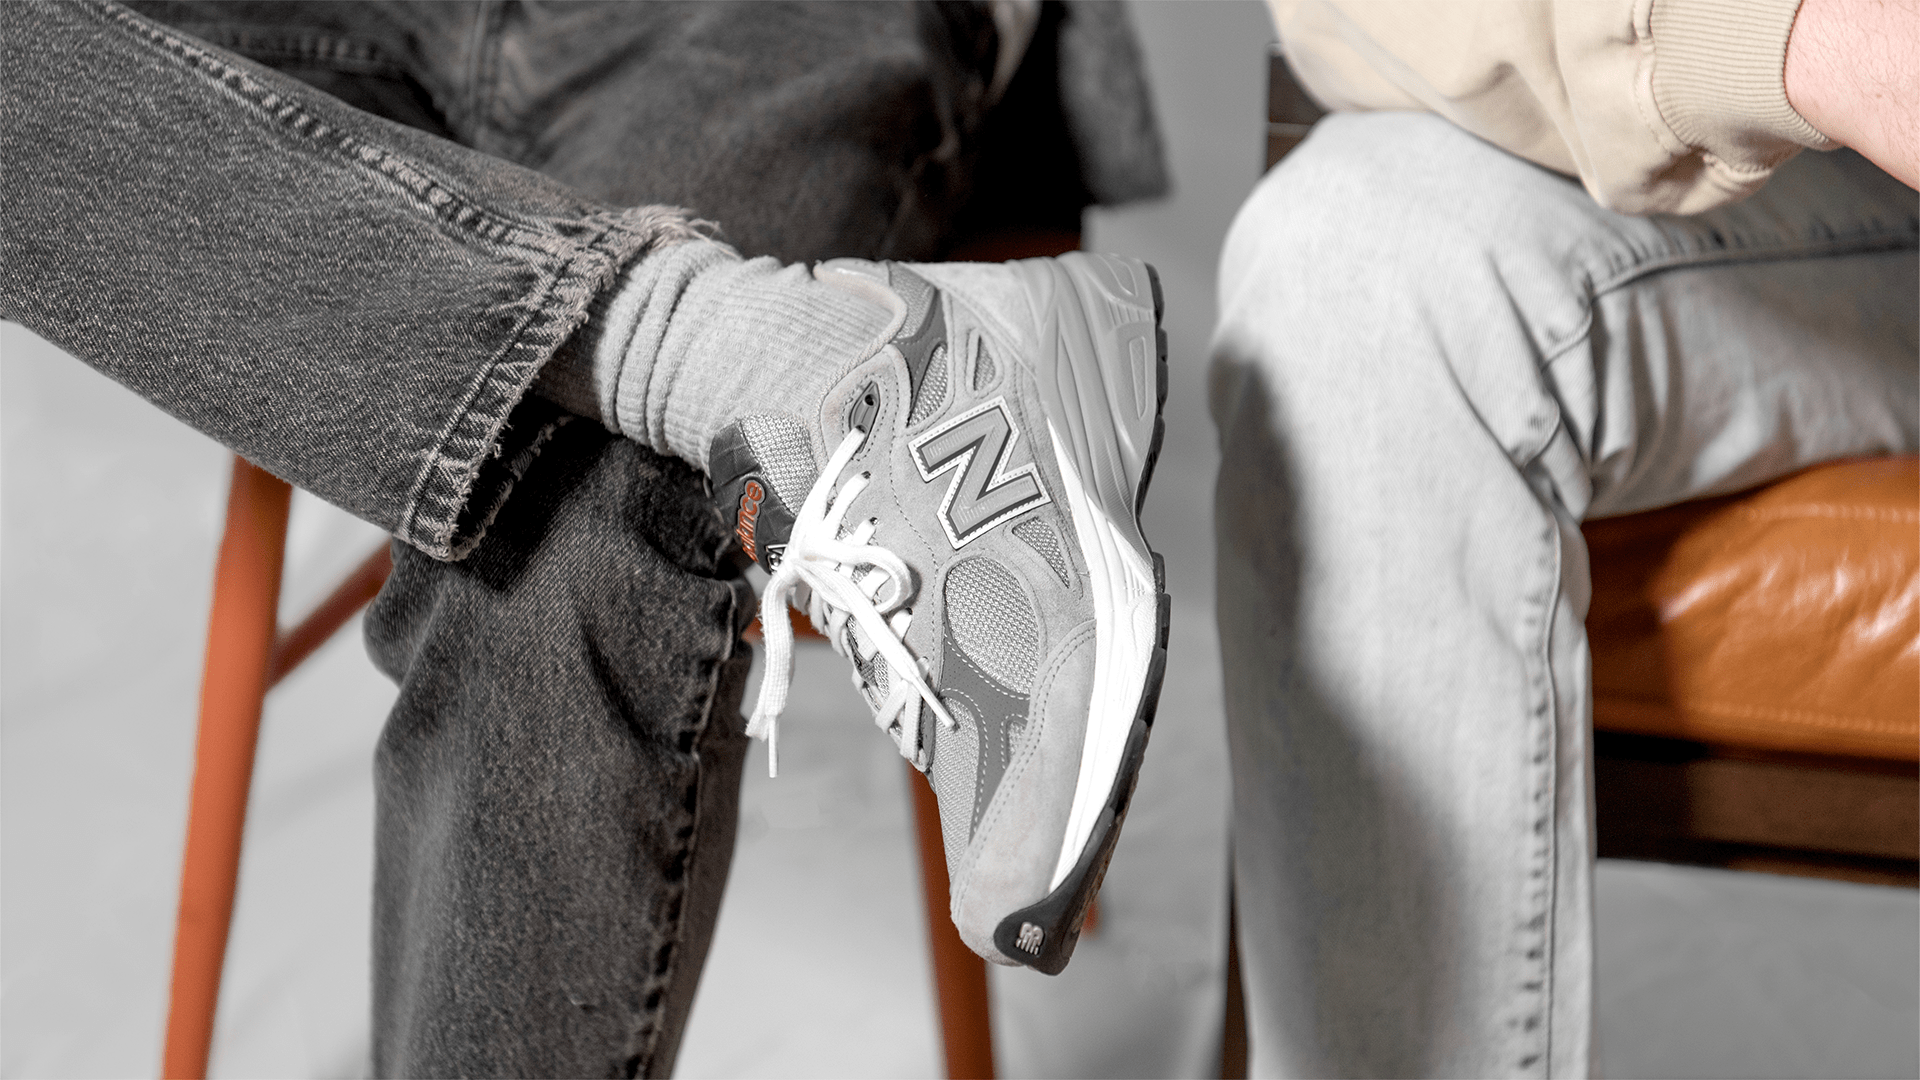 Discover: How the New Balance 990 Became a Cult Classic. The Sole Supplier